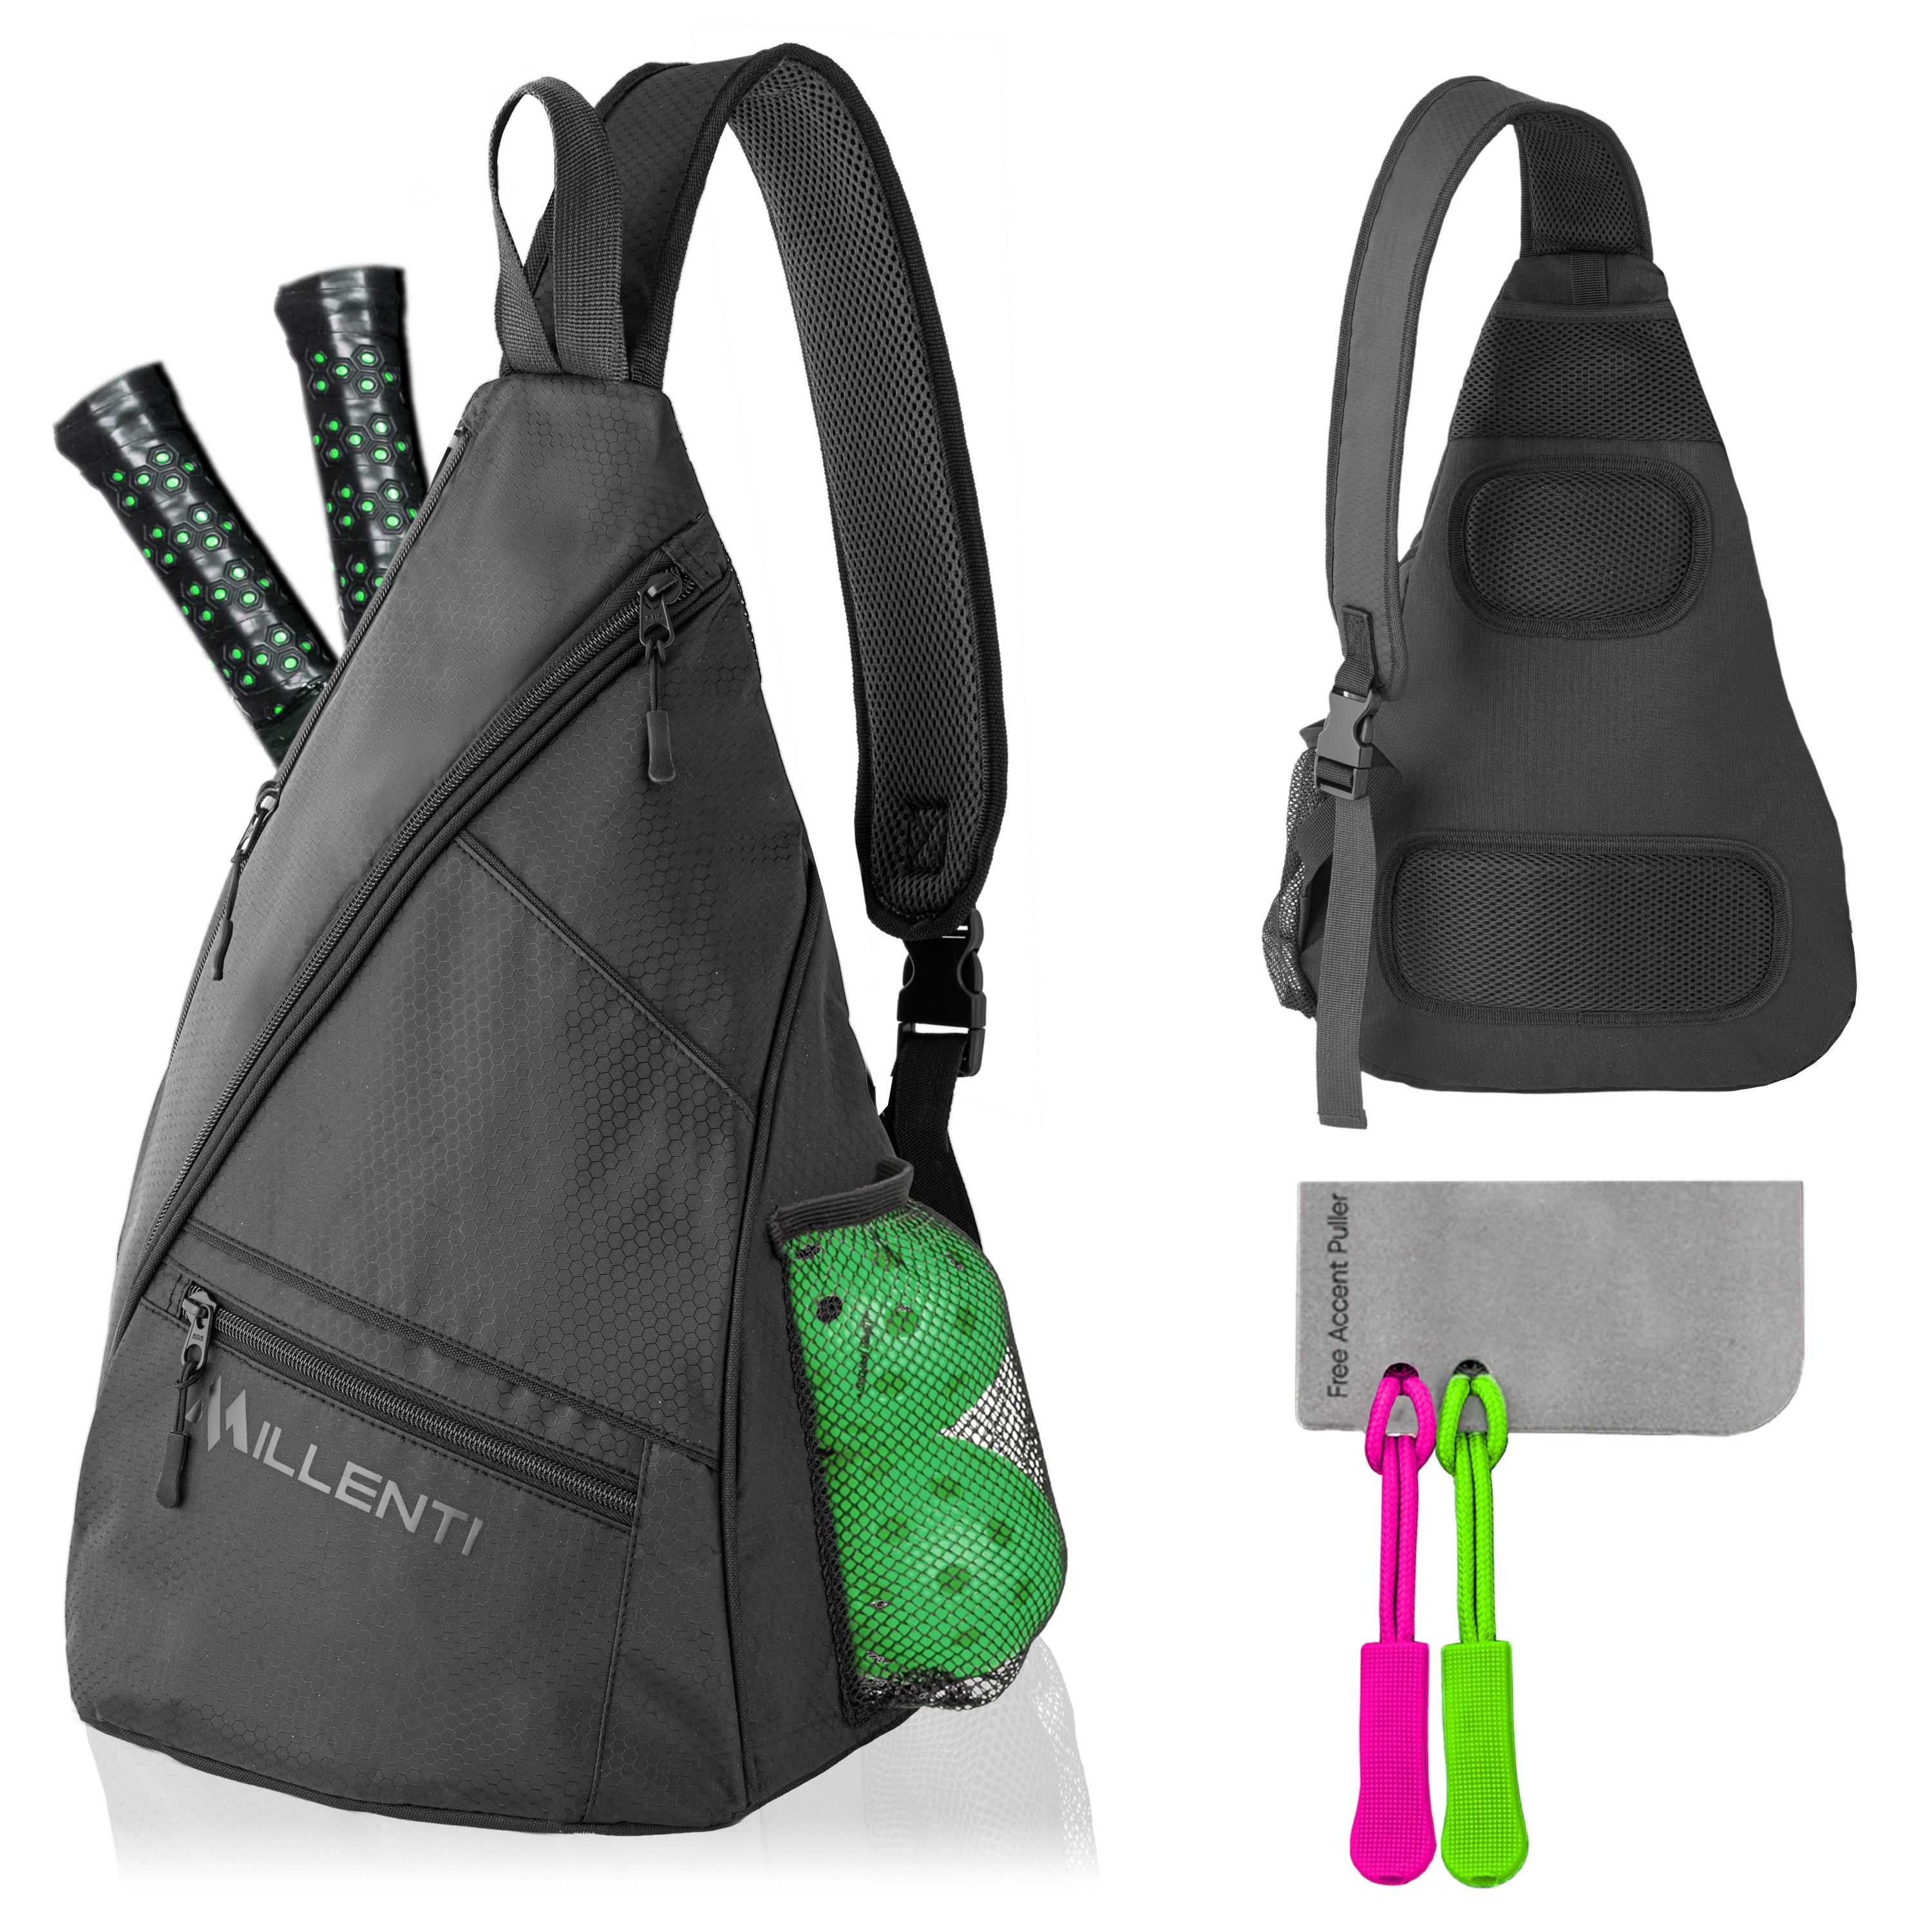 Millenti Sling Bag Crossbody Backpack - Lightweight Pickleball Bag or Basketball Ball Bag with a Fence Hook, Water Bottle Holder with Black Green or Cute Pink Zipper Pullers PB01B